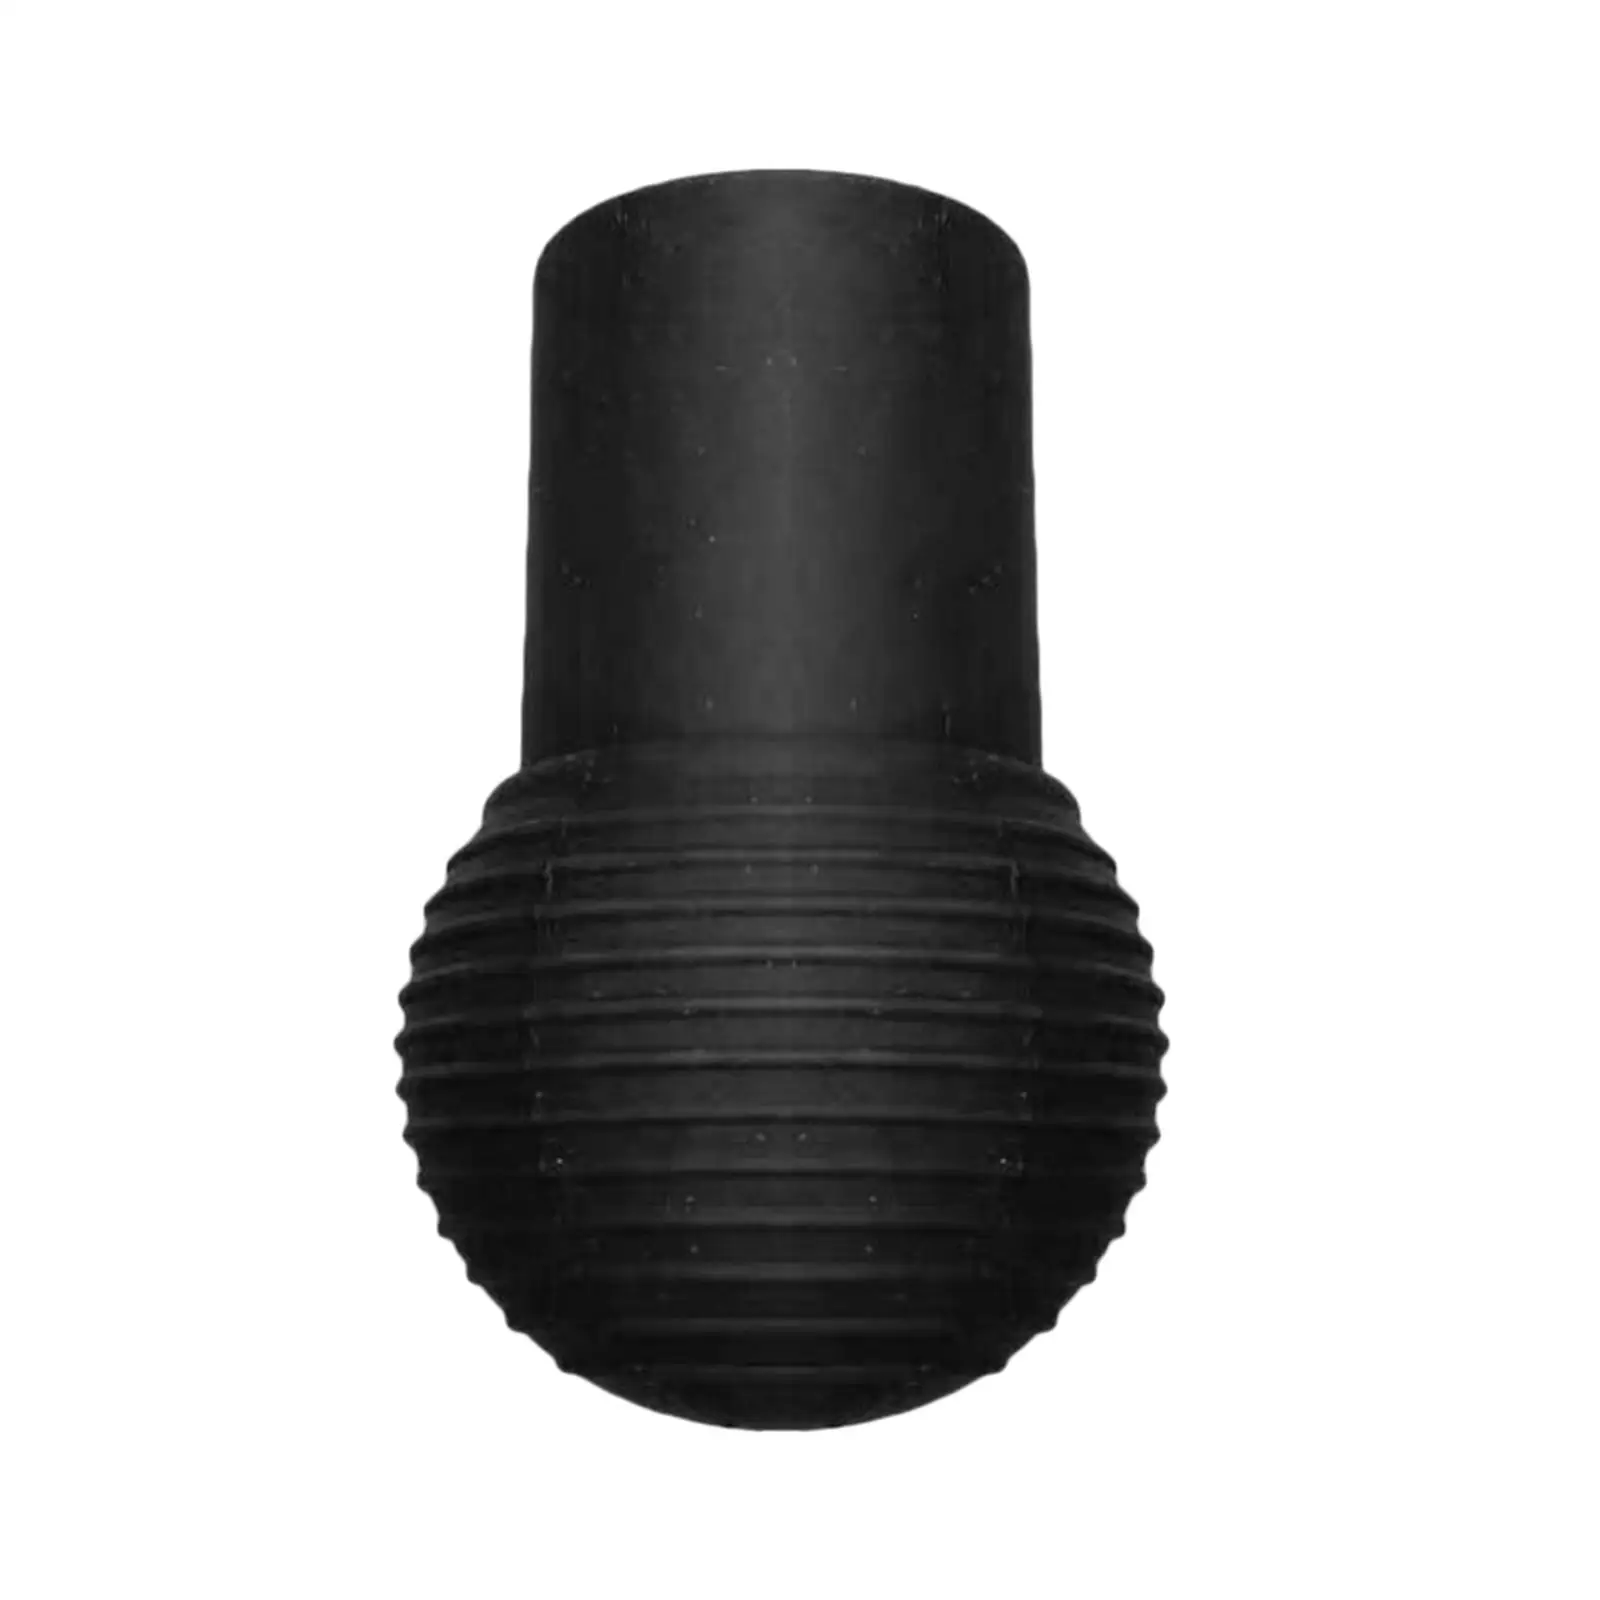 Barbell Landmine Holder 2 inch Ball Base Silicone Black Barbell Floor Swivel for Split Squats Presses Rows Rotation Home Gym